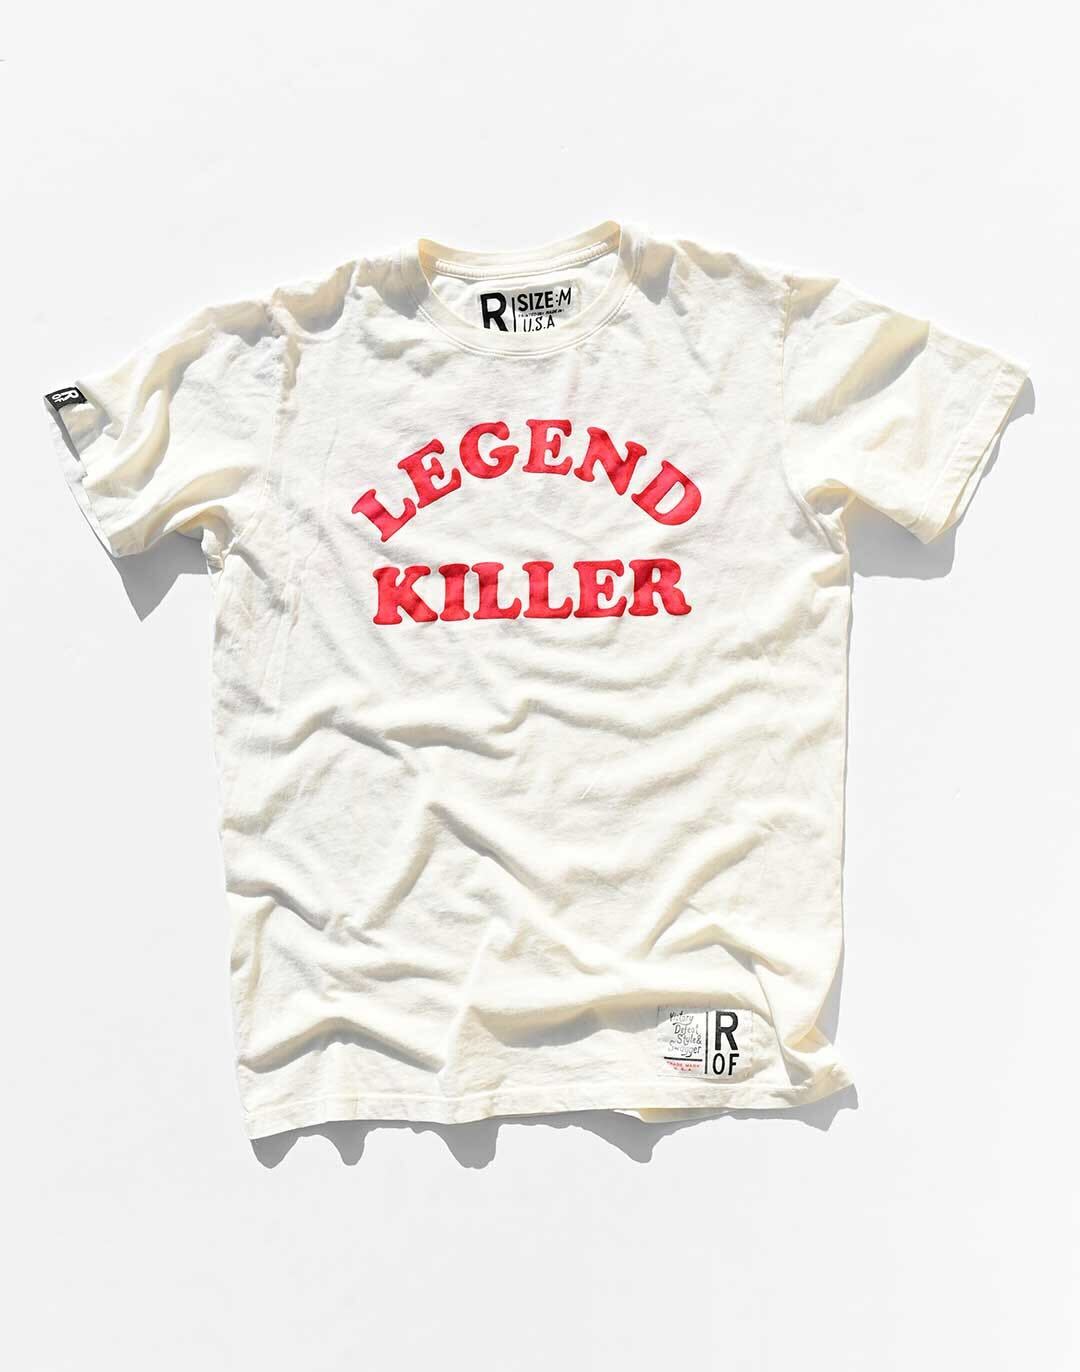 Rowdy Roddy Piper Legend Killer White Tee - Roots of Fight Canada